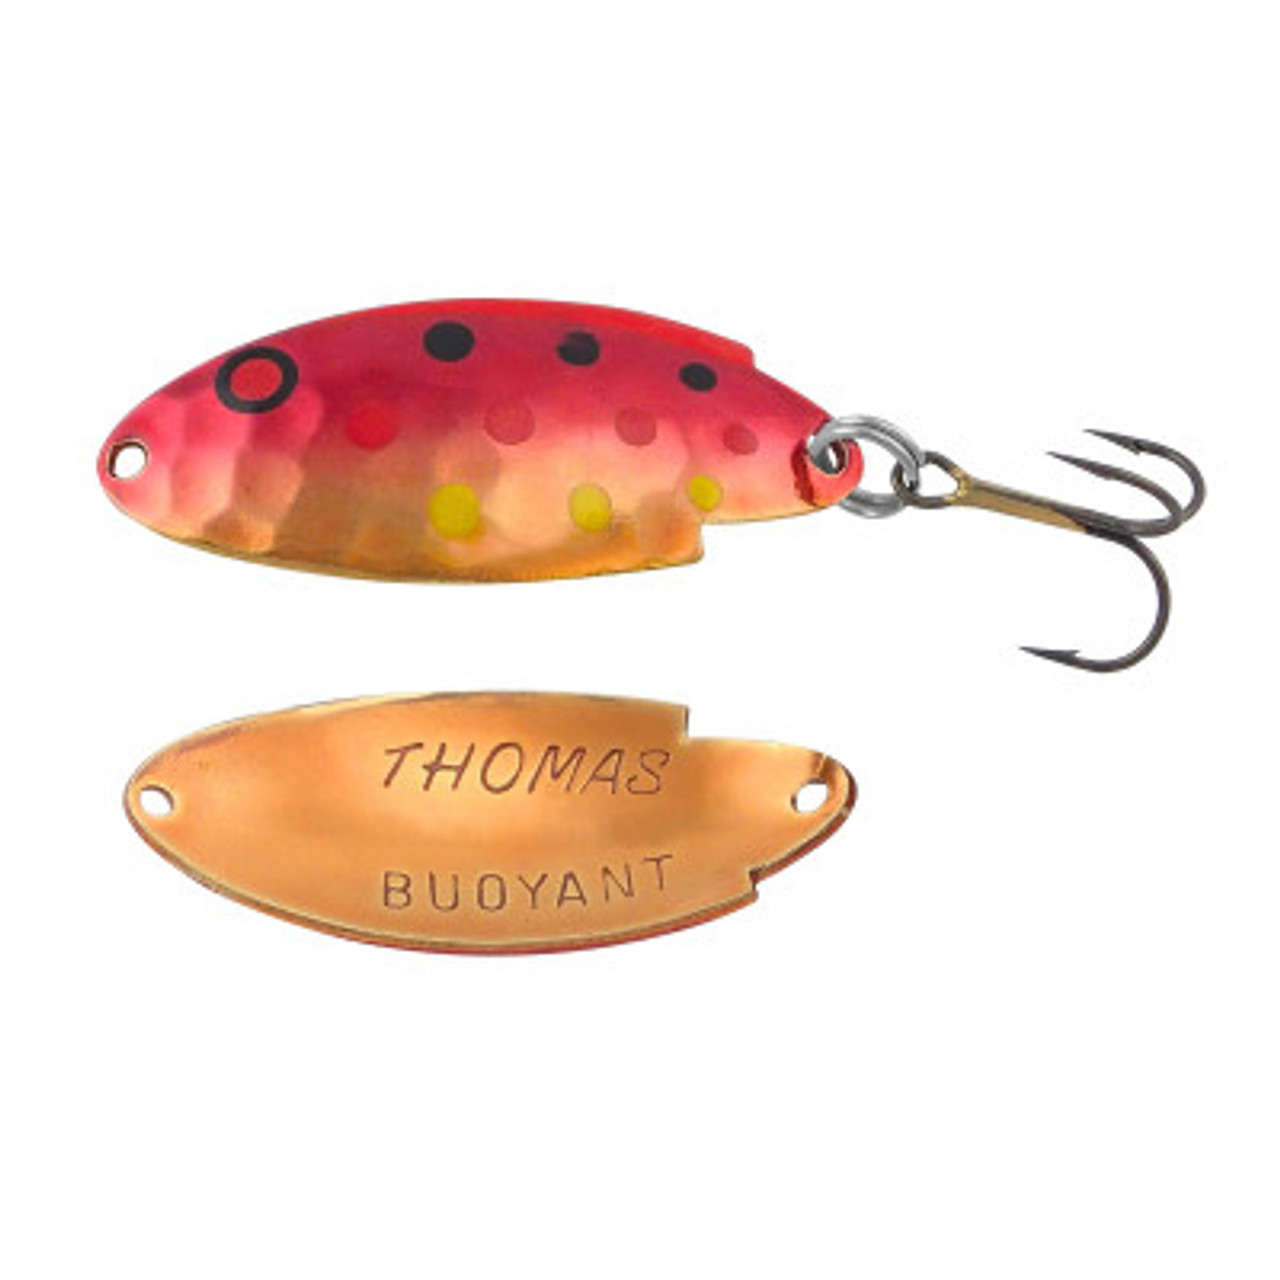 RON THOMPSON TROUT KIT SPINNER 8 - 18 g FISHING LURE CHUB PERCH SPOON STRONG